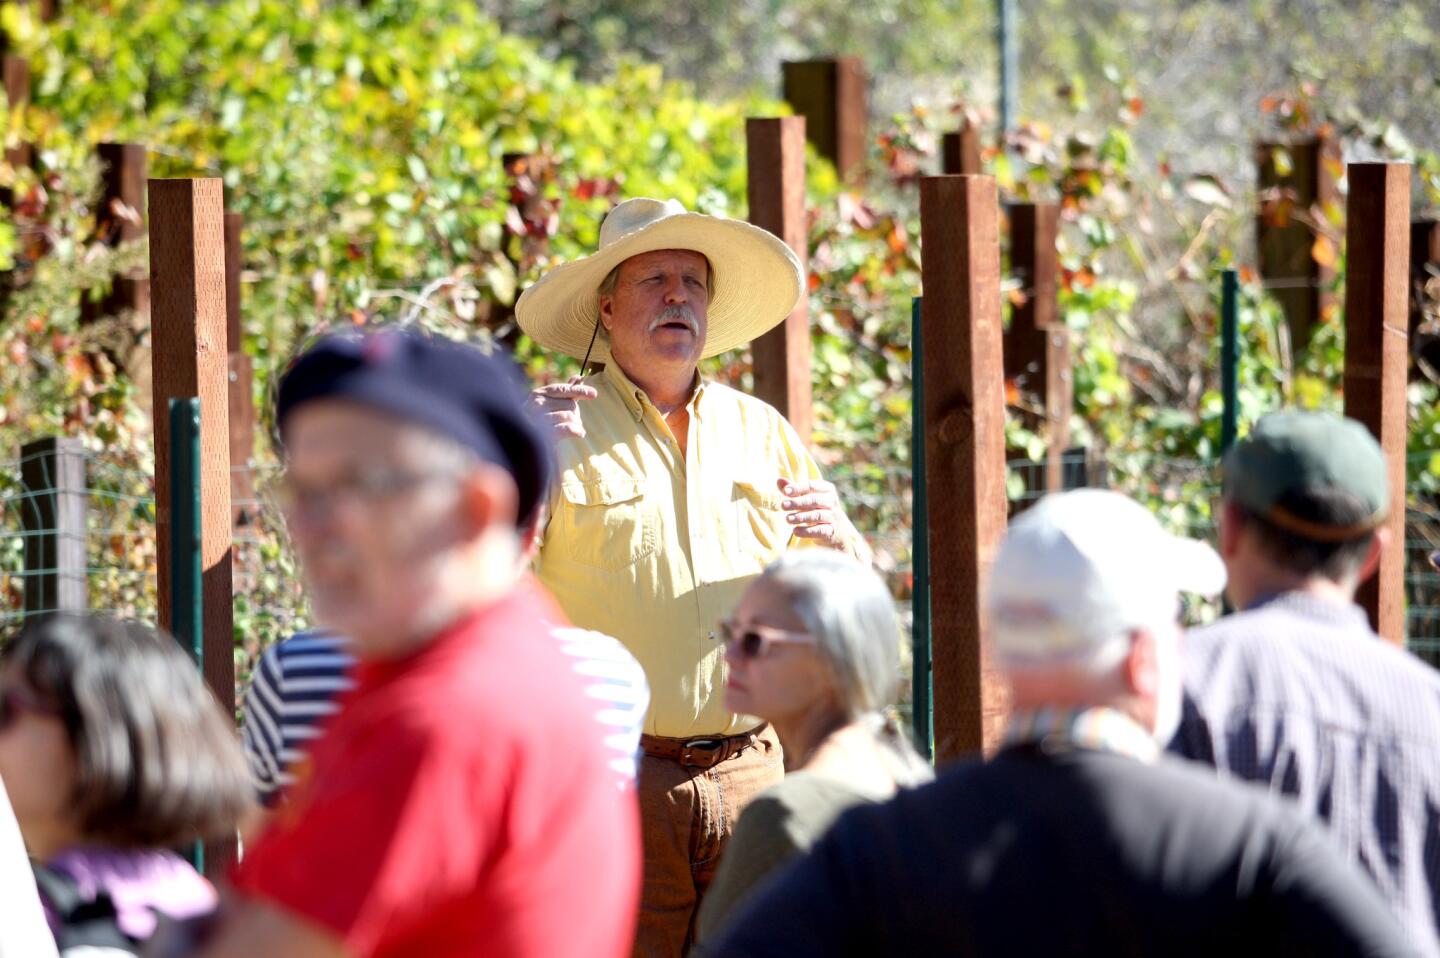 Stuart Byles from the Stone Barn Vineyard Conservancy lead a tour of the grounds during the History of Winemaking in the Crescenta Valley event at Deukmejian Wilderness Park in Glendale on Saturday, November 7, 2015. After an informational talk about the area, attendees got a brief tour of the vineyard at the park.